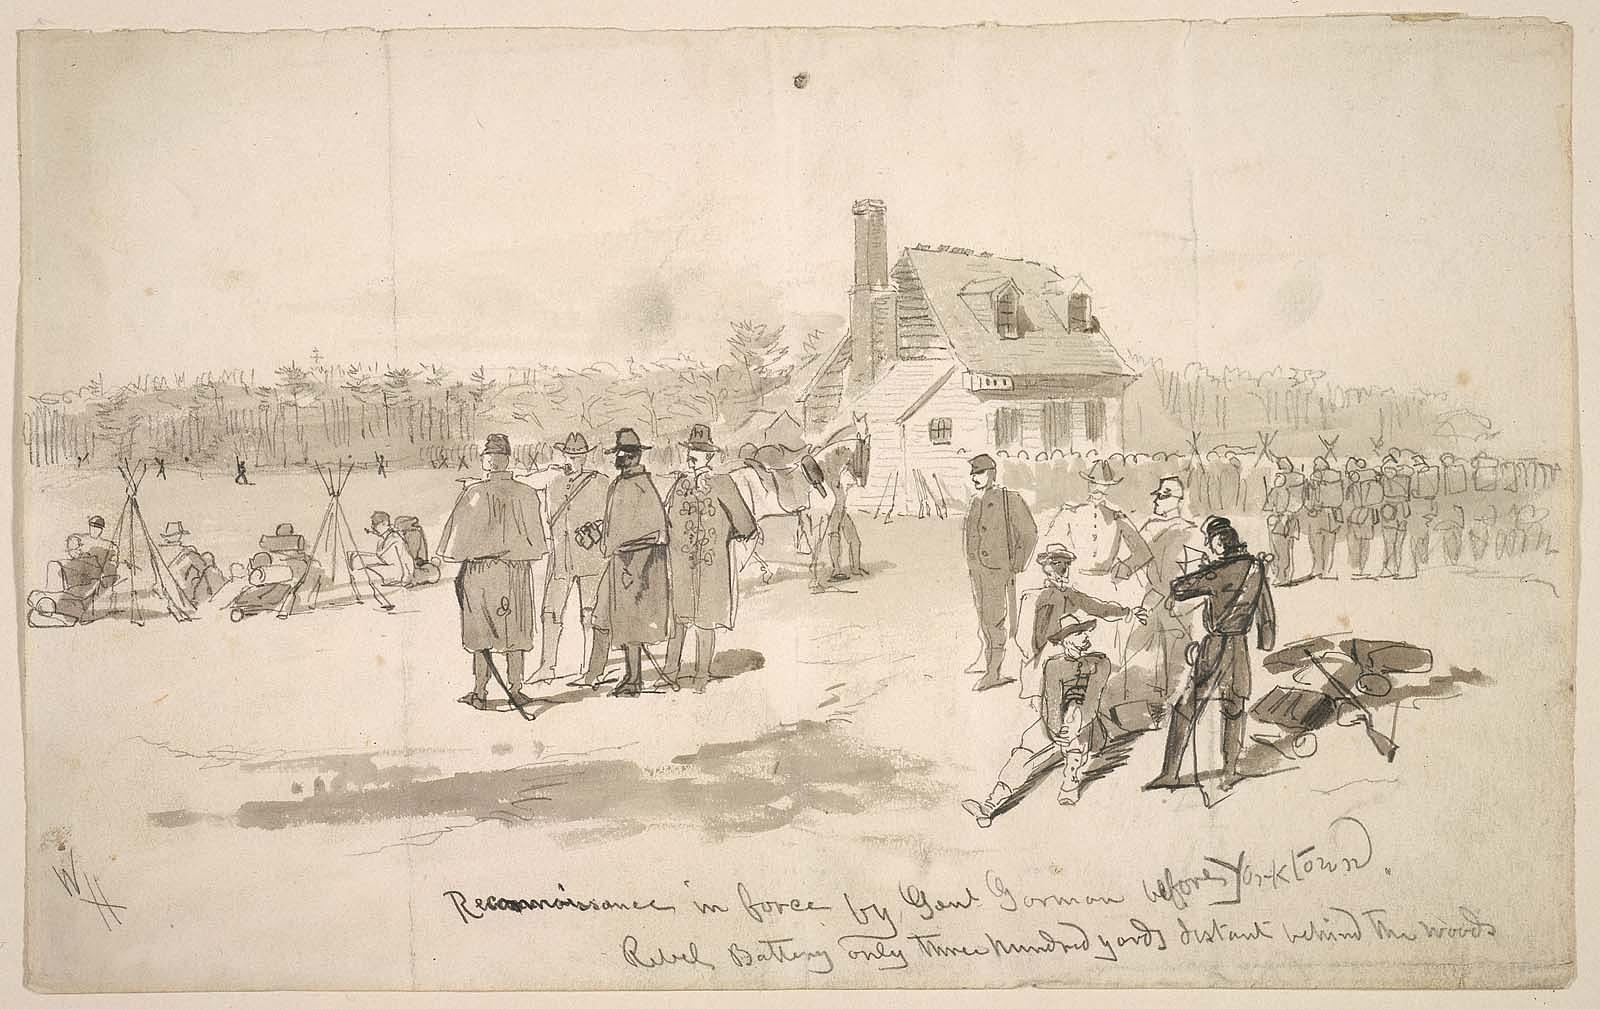 Winslow Homer, <em>Reconnaissance in force by General Gorman before Yorktown</em>, 1862, graphite with brush and gray wash on cream wove paper, 21 x 33.7 cm (<a  data-cke-saved-href="https://collections.mfa.org/objects/761/reconnaissance-in-force-by-general-gorman-before-yorktown;ctx=83dbd38f-43fc-462c-a83b-8cd68fc1aa71&amp;idx=5" href="https://collections.mfa.org/objects/761/reconnaissance-in-force-by-general-gorman-before-yorktown;ctx=83dbd38f-43fc-462c-a83b-8cd68fc1aa71&amp;idx=5">Museum of Fine Arts, Boston</a>)